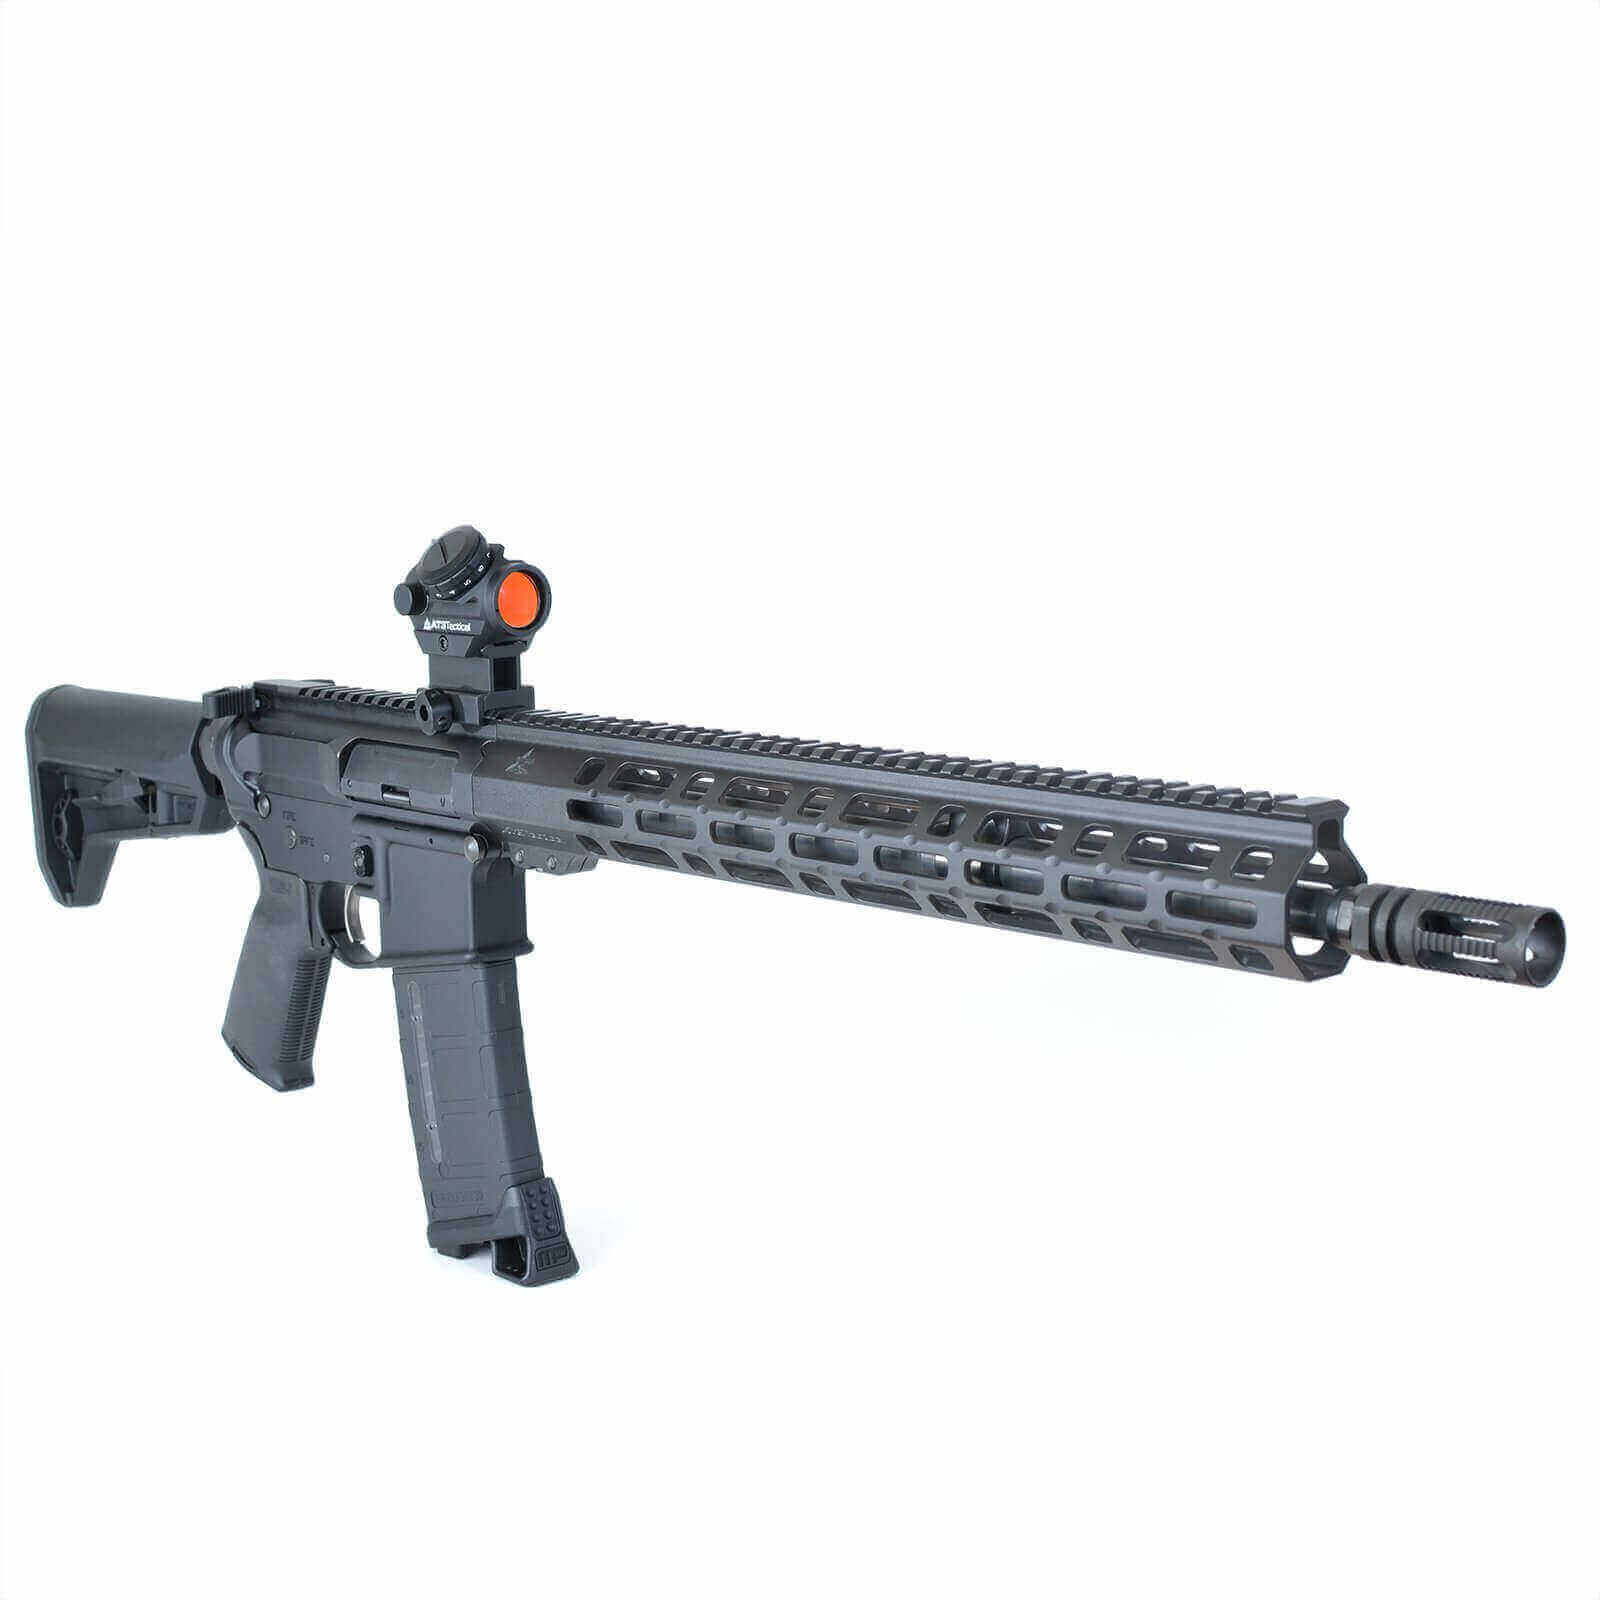 AT3™ AR 15 Upper Receiver and SPEAR Handguard Combo.